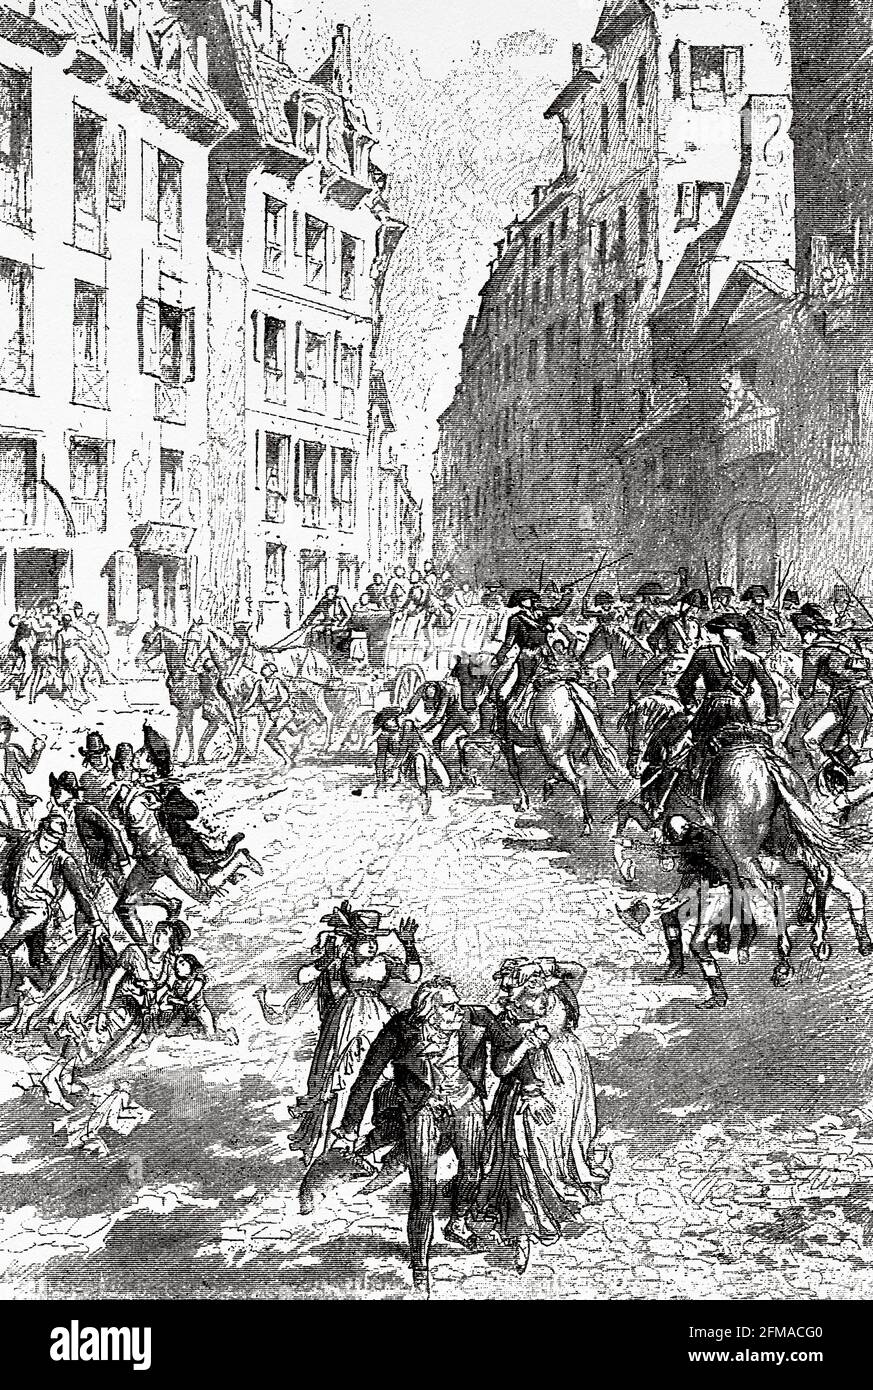 Francois Henriot (1761-1794) dispersed the crowd with sabers, Paris. France. Old 19th century engraved illustration from Histoire de la Revolution Francaise 1876 by Jules Michelet (1798-1874) Stock Photo